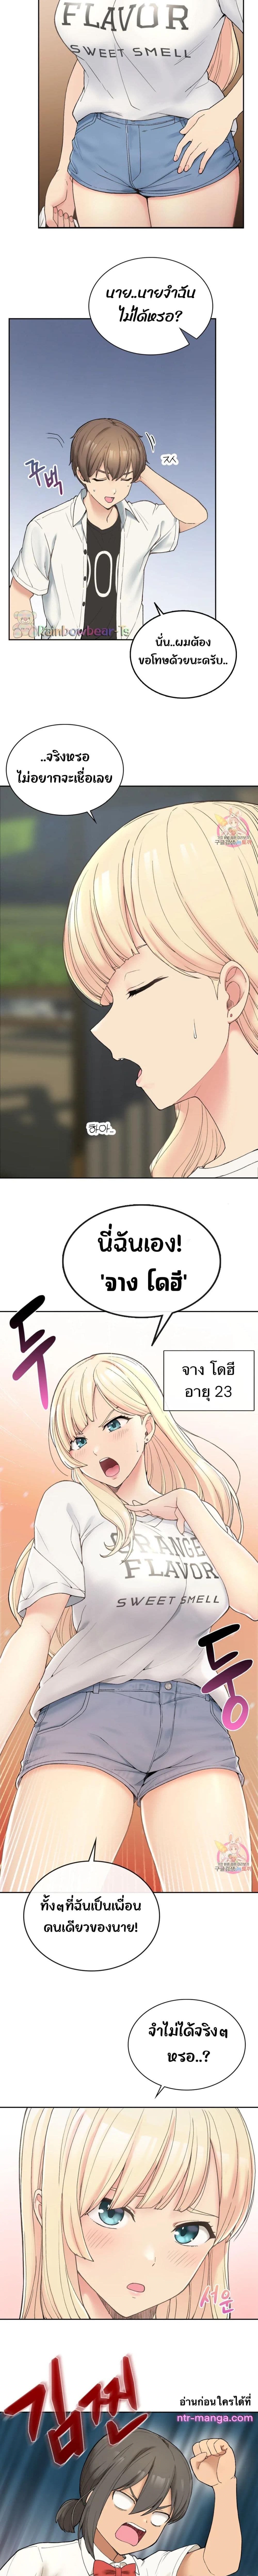 Shall We Live Together in the Country ตอนที่ 1 ภาพ 15